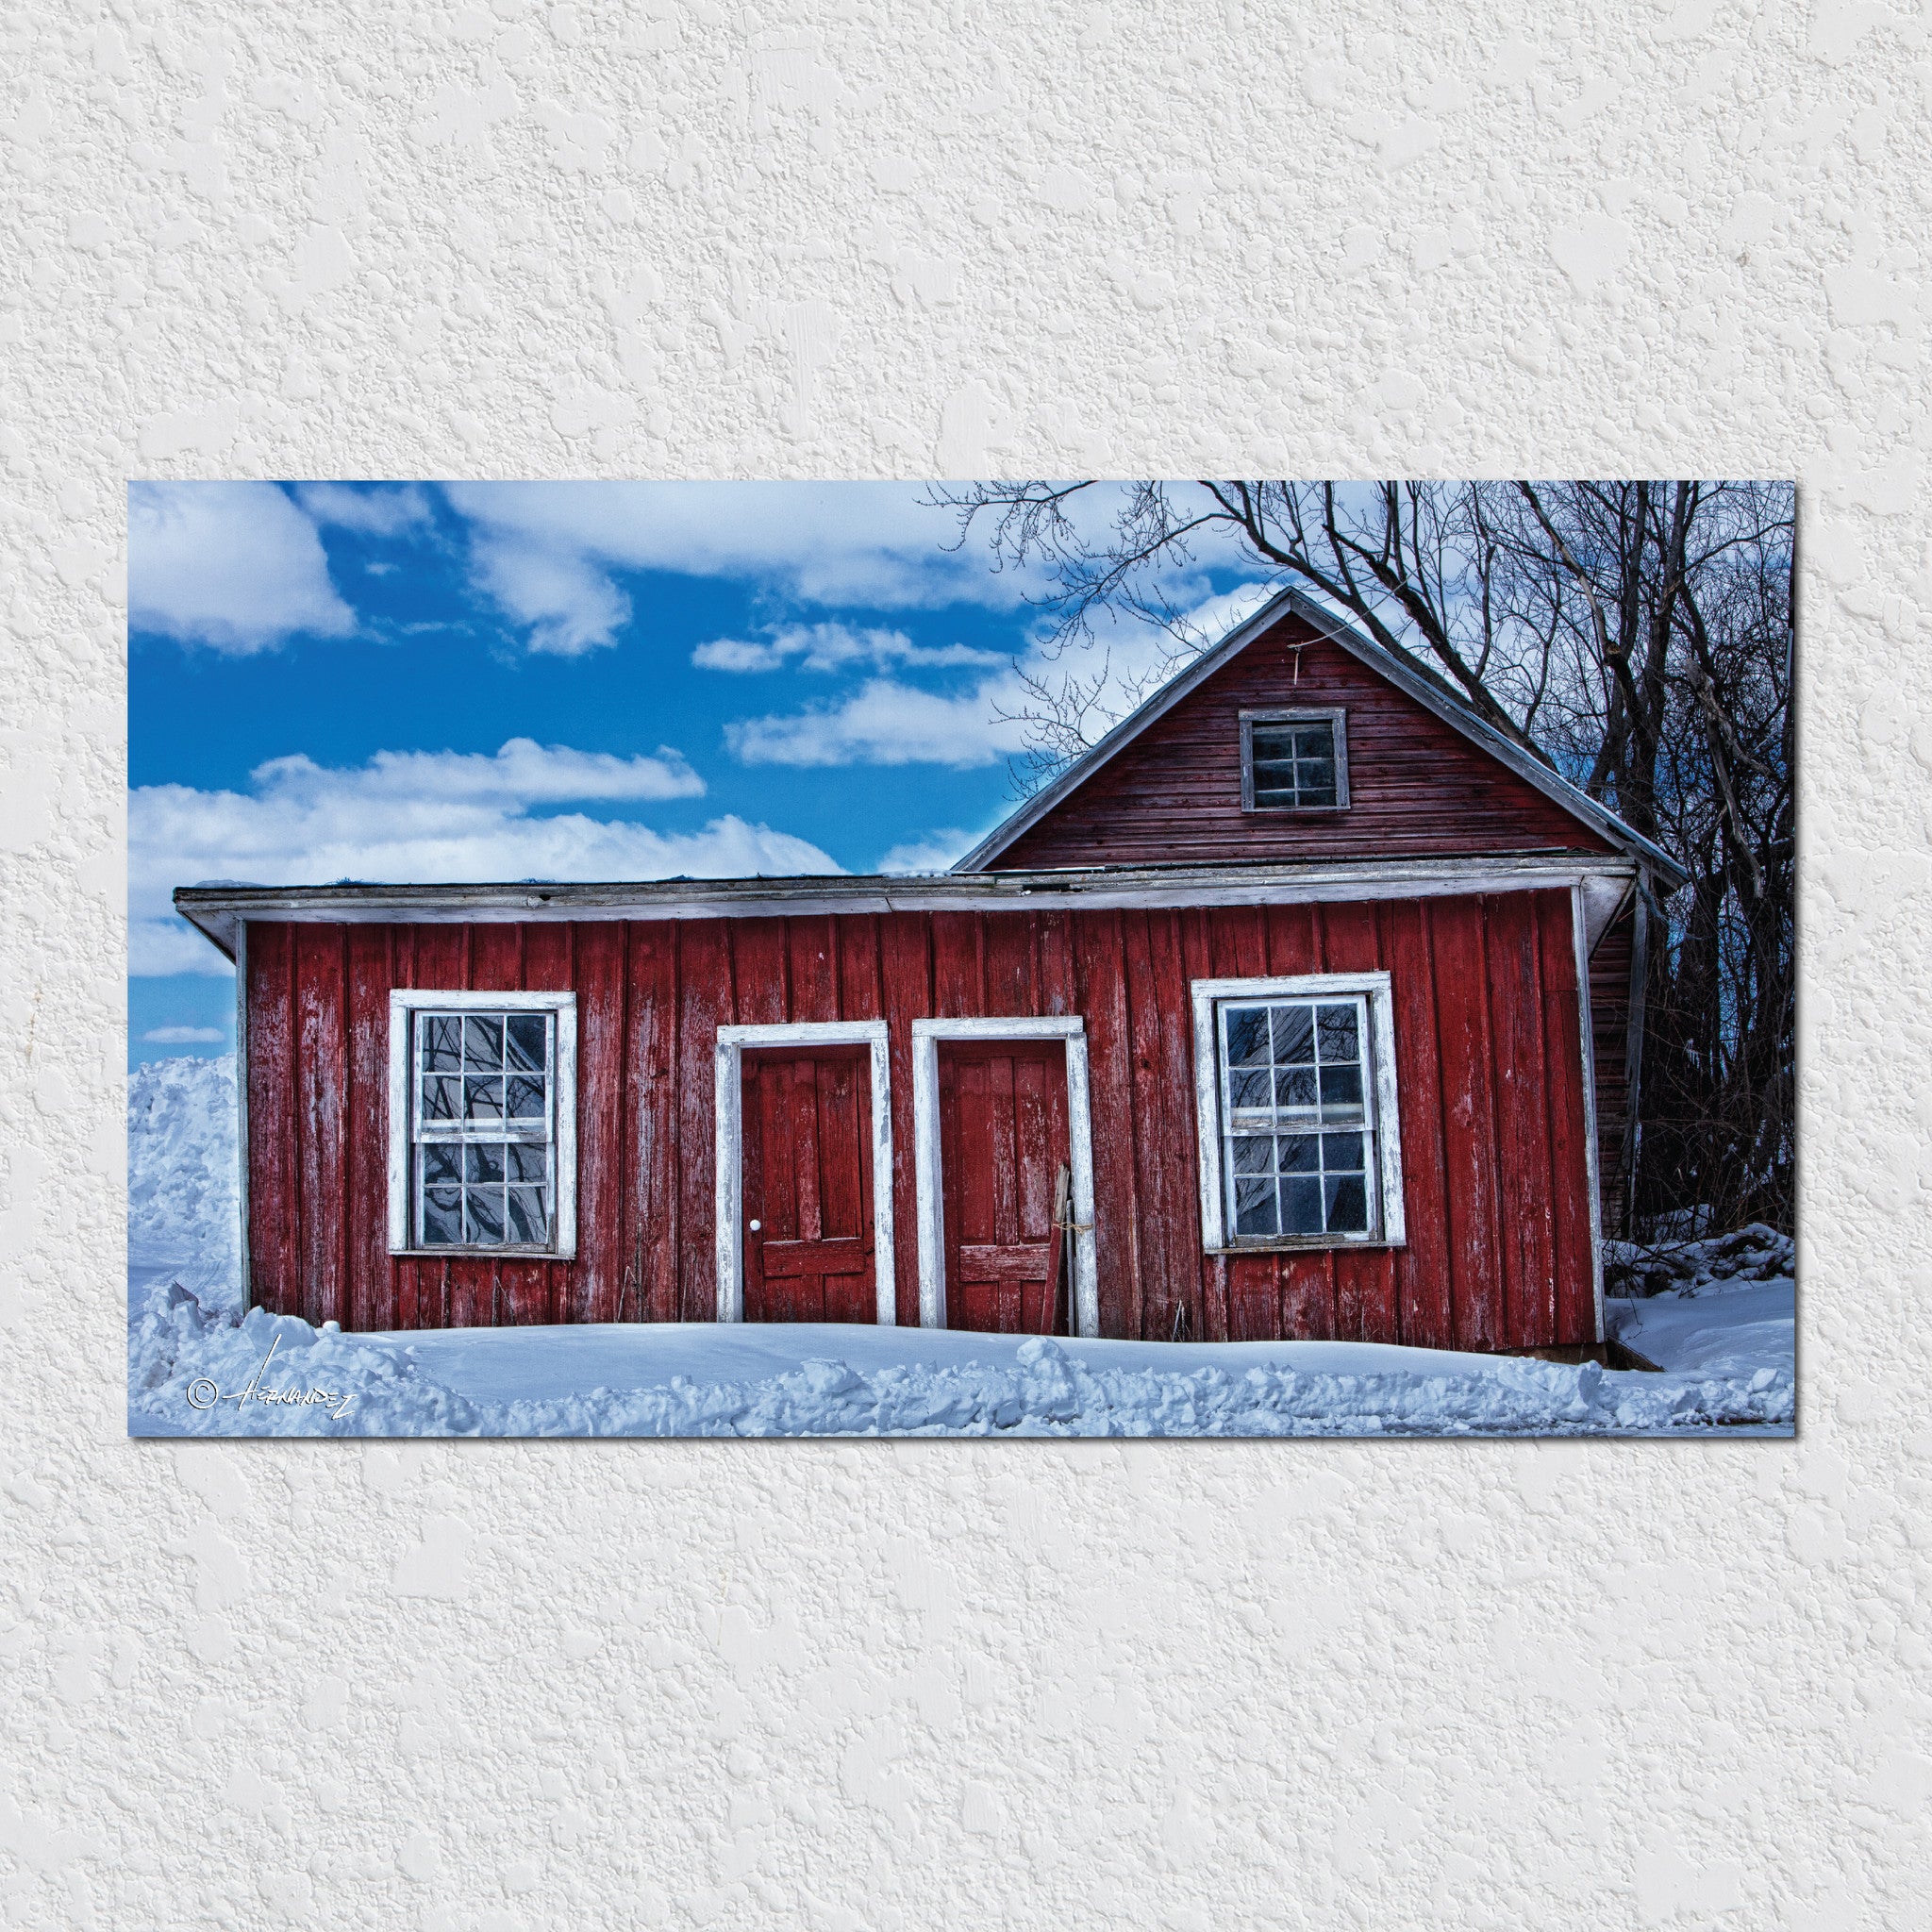 Red Shed In Snow by Peter Hernandez